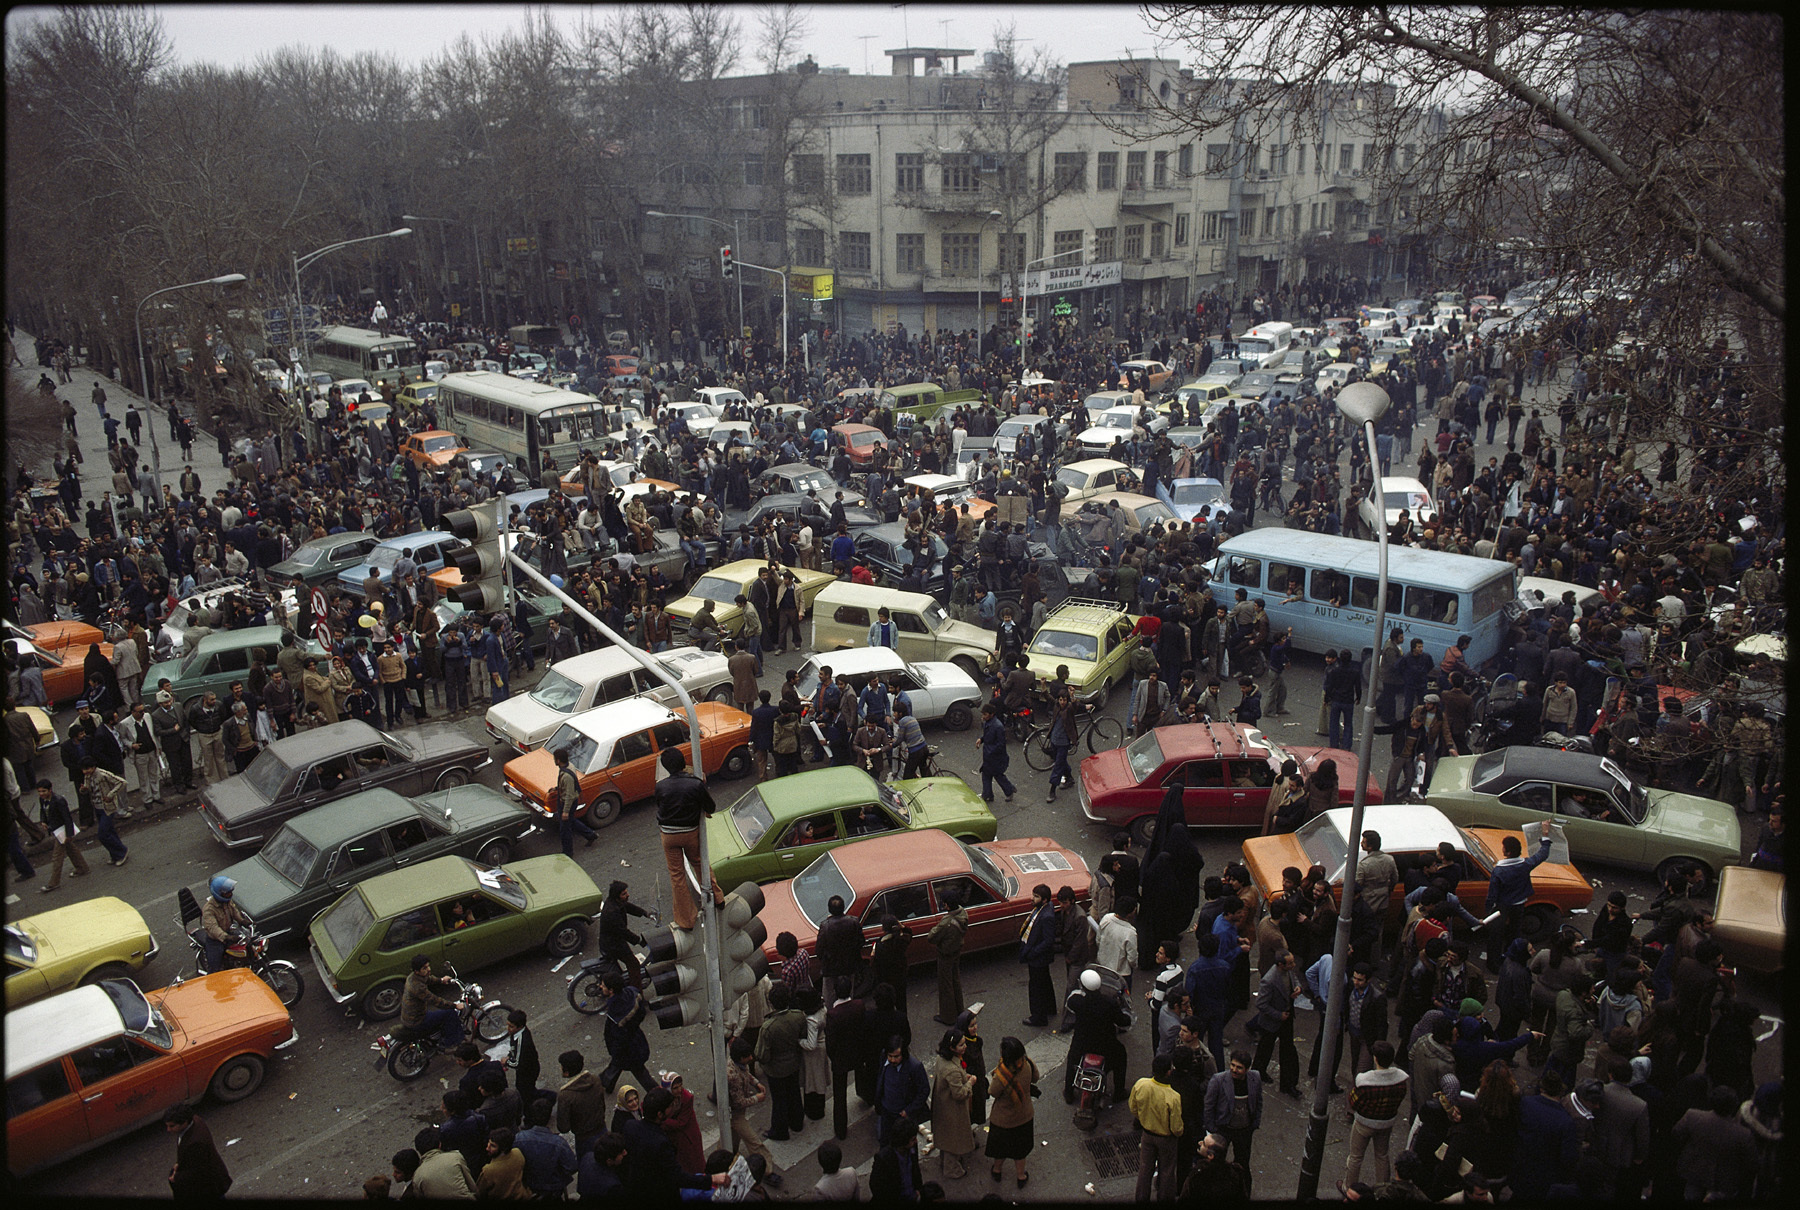 On the day of the Shah's departure, Tehran streets were clogged with well-wishing traffic. : 44 Days: the Iranian Revolution : David Burnett | Photographer